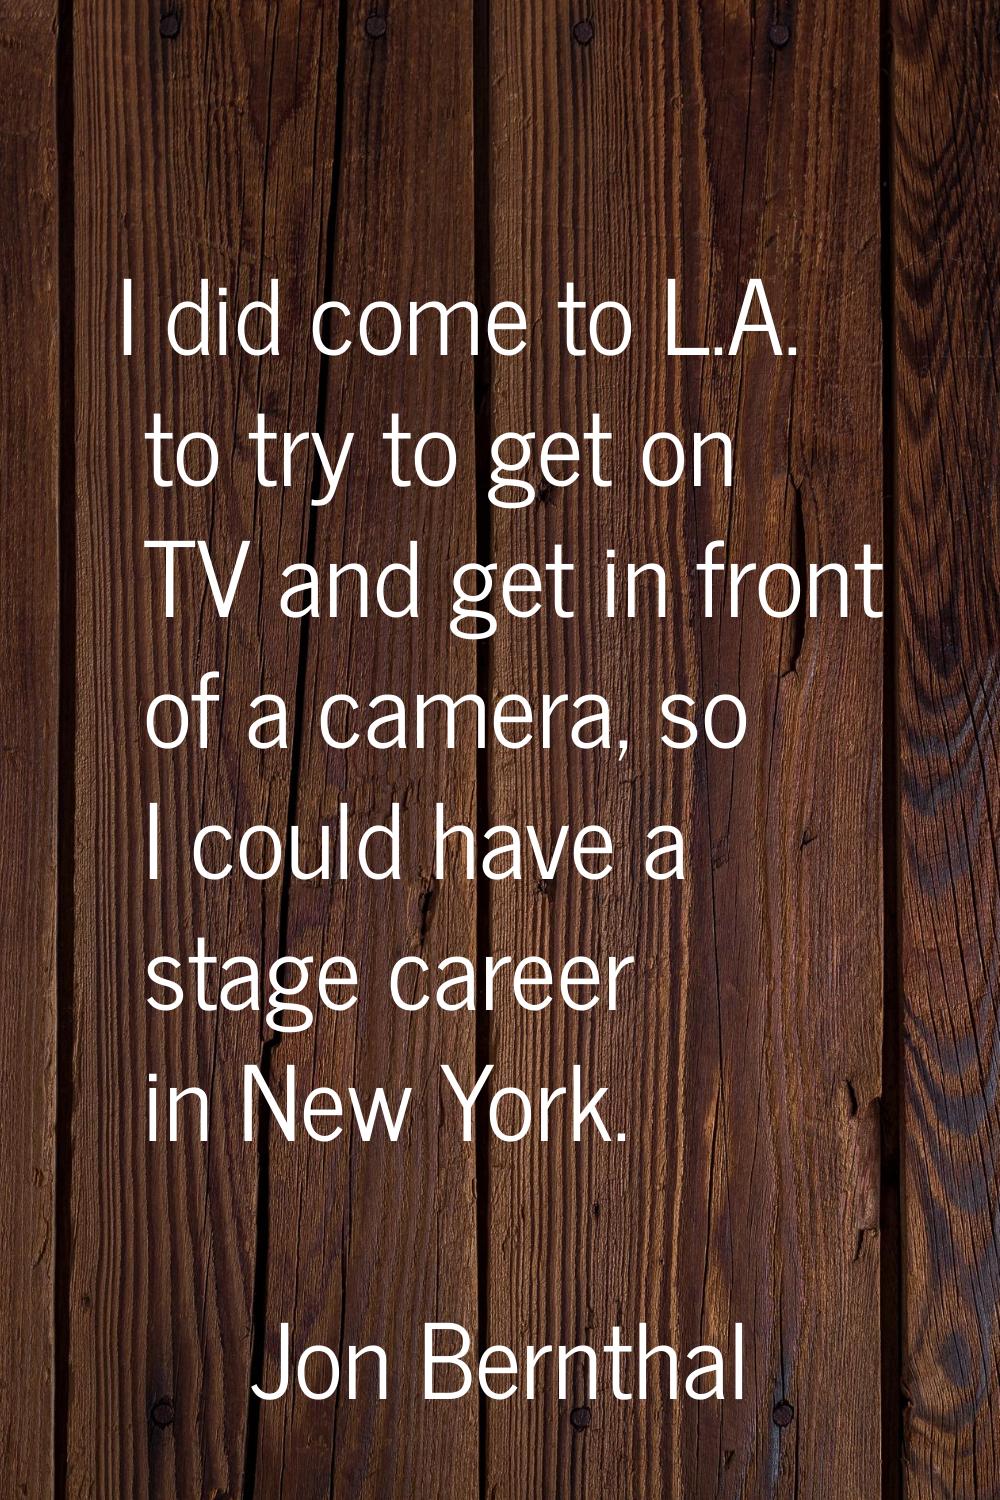 I did come to L.A. to try to get on TV and get in front of a camera, so I could have a stage career